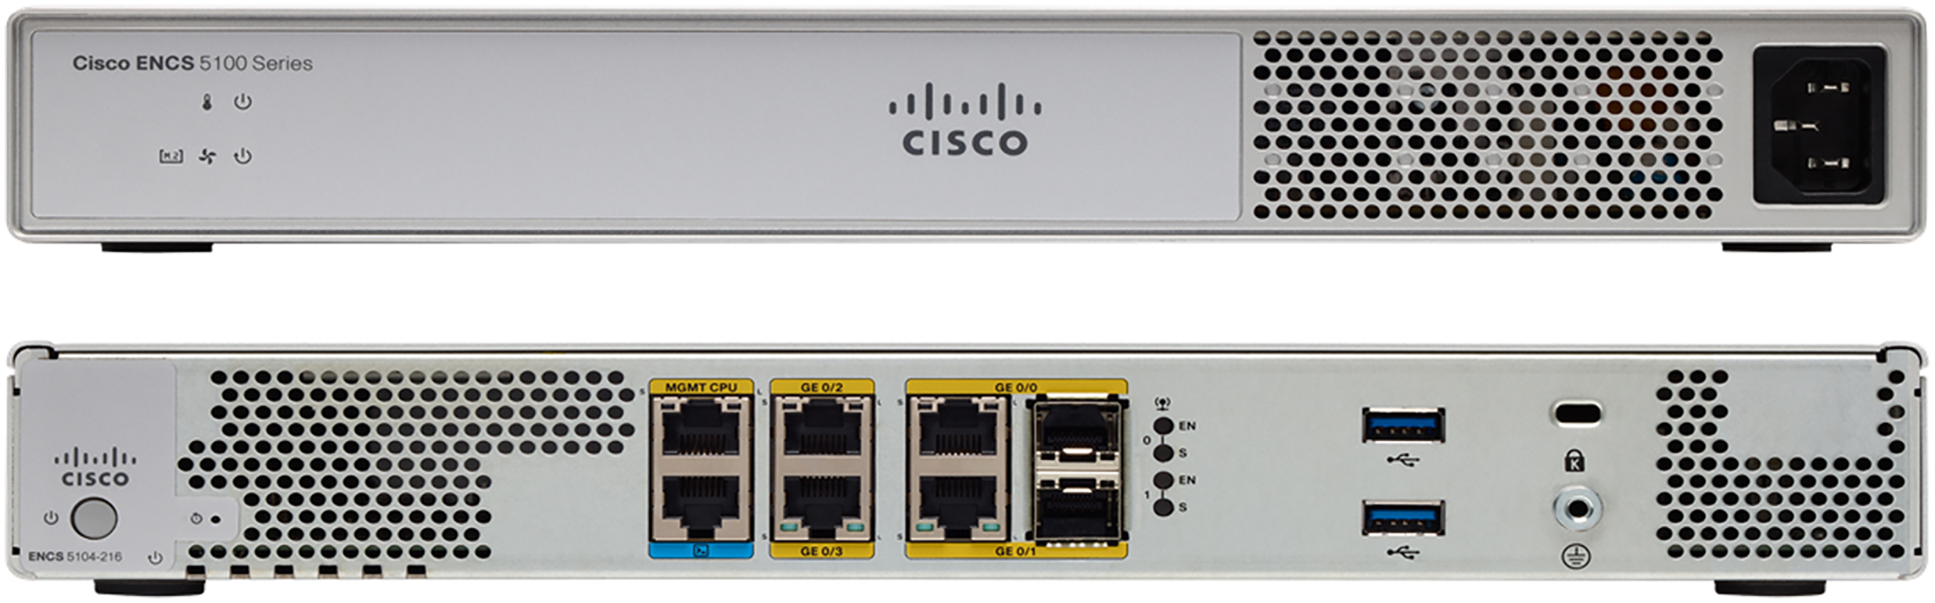 Cisco 5100 Enterprise Network Compute System – Front and Back